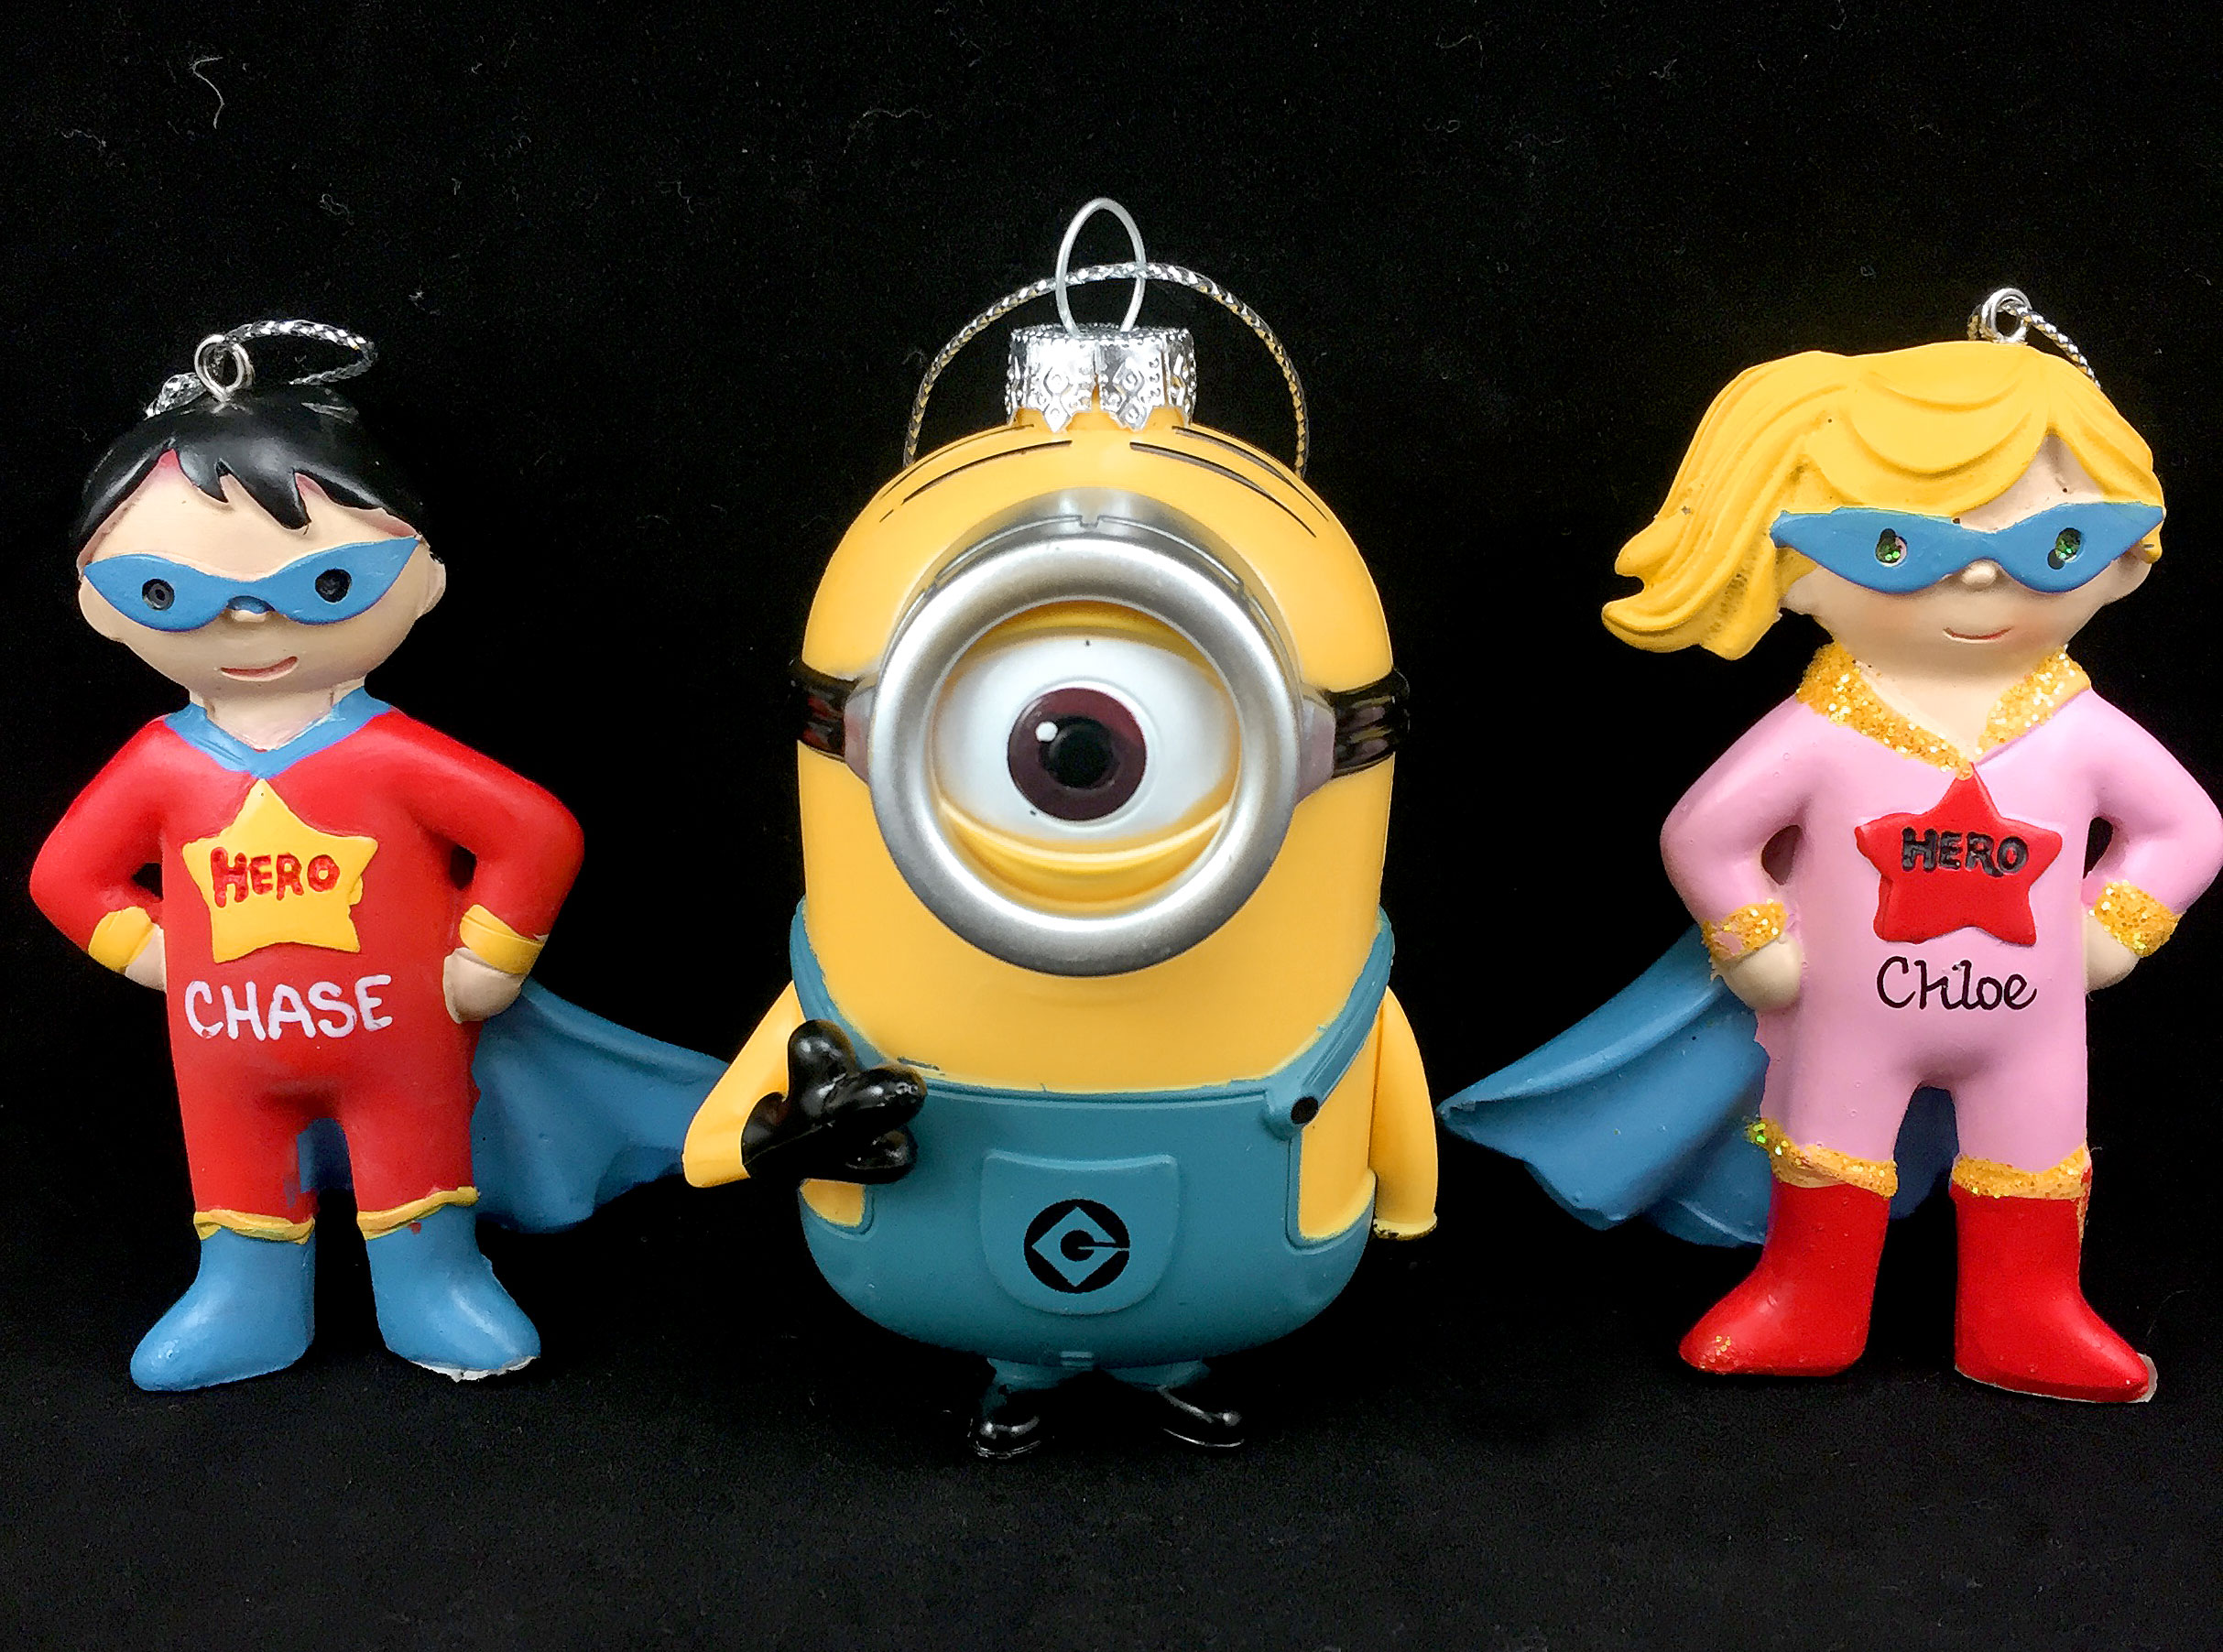 Two superhero kid ornaments wearing capes and masks, and a one-eyed minion ornament | OrnamentShop